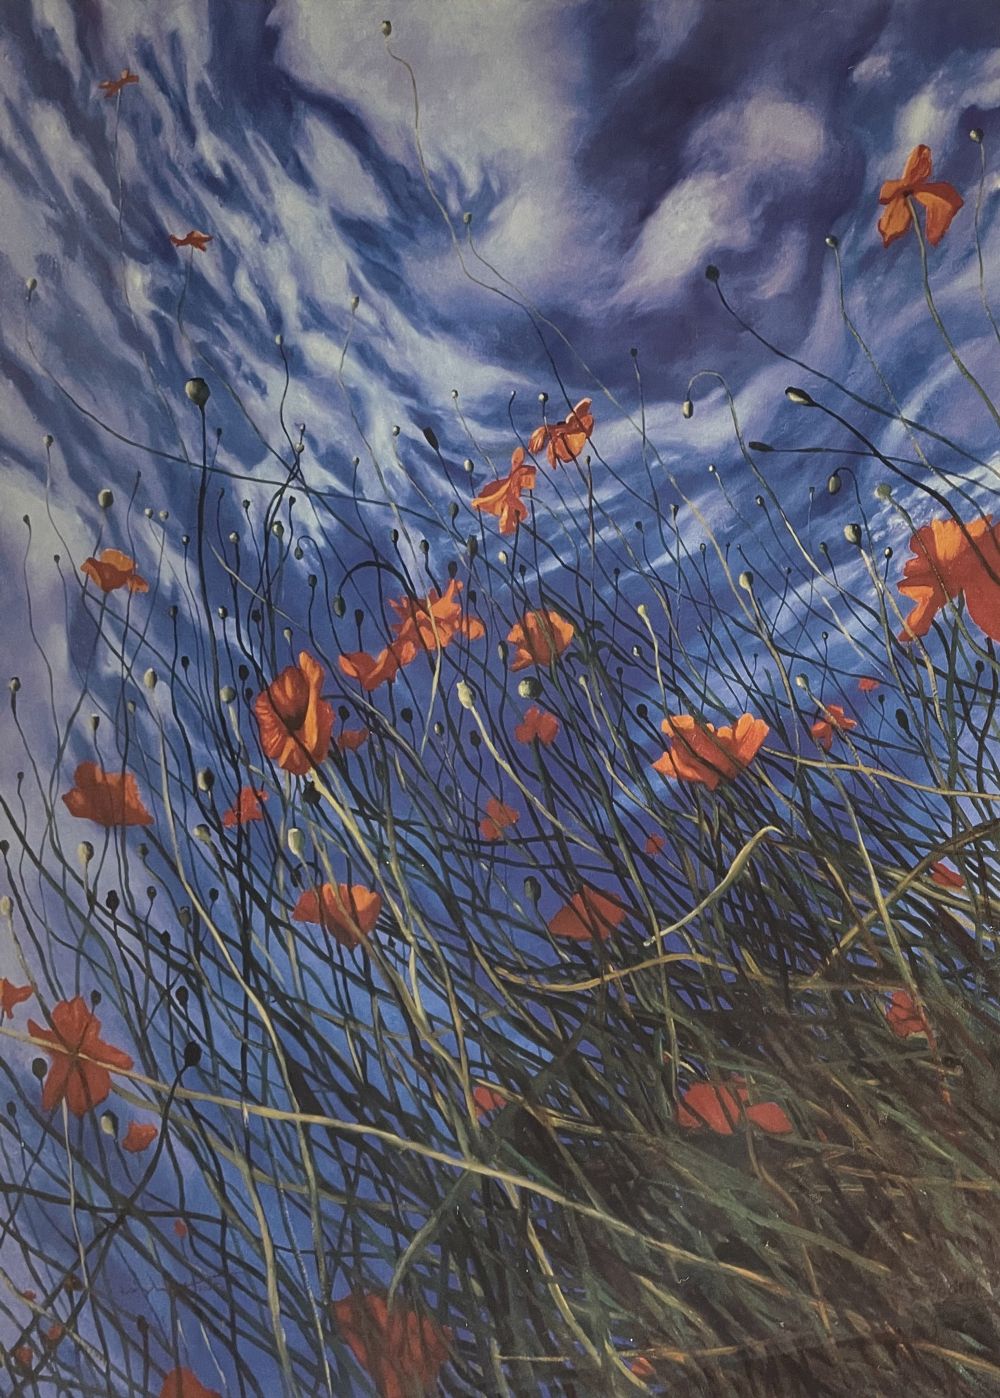 STORM OF POPPIES by RASHER sold for €260 at deVeres Auctions